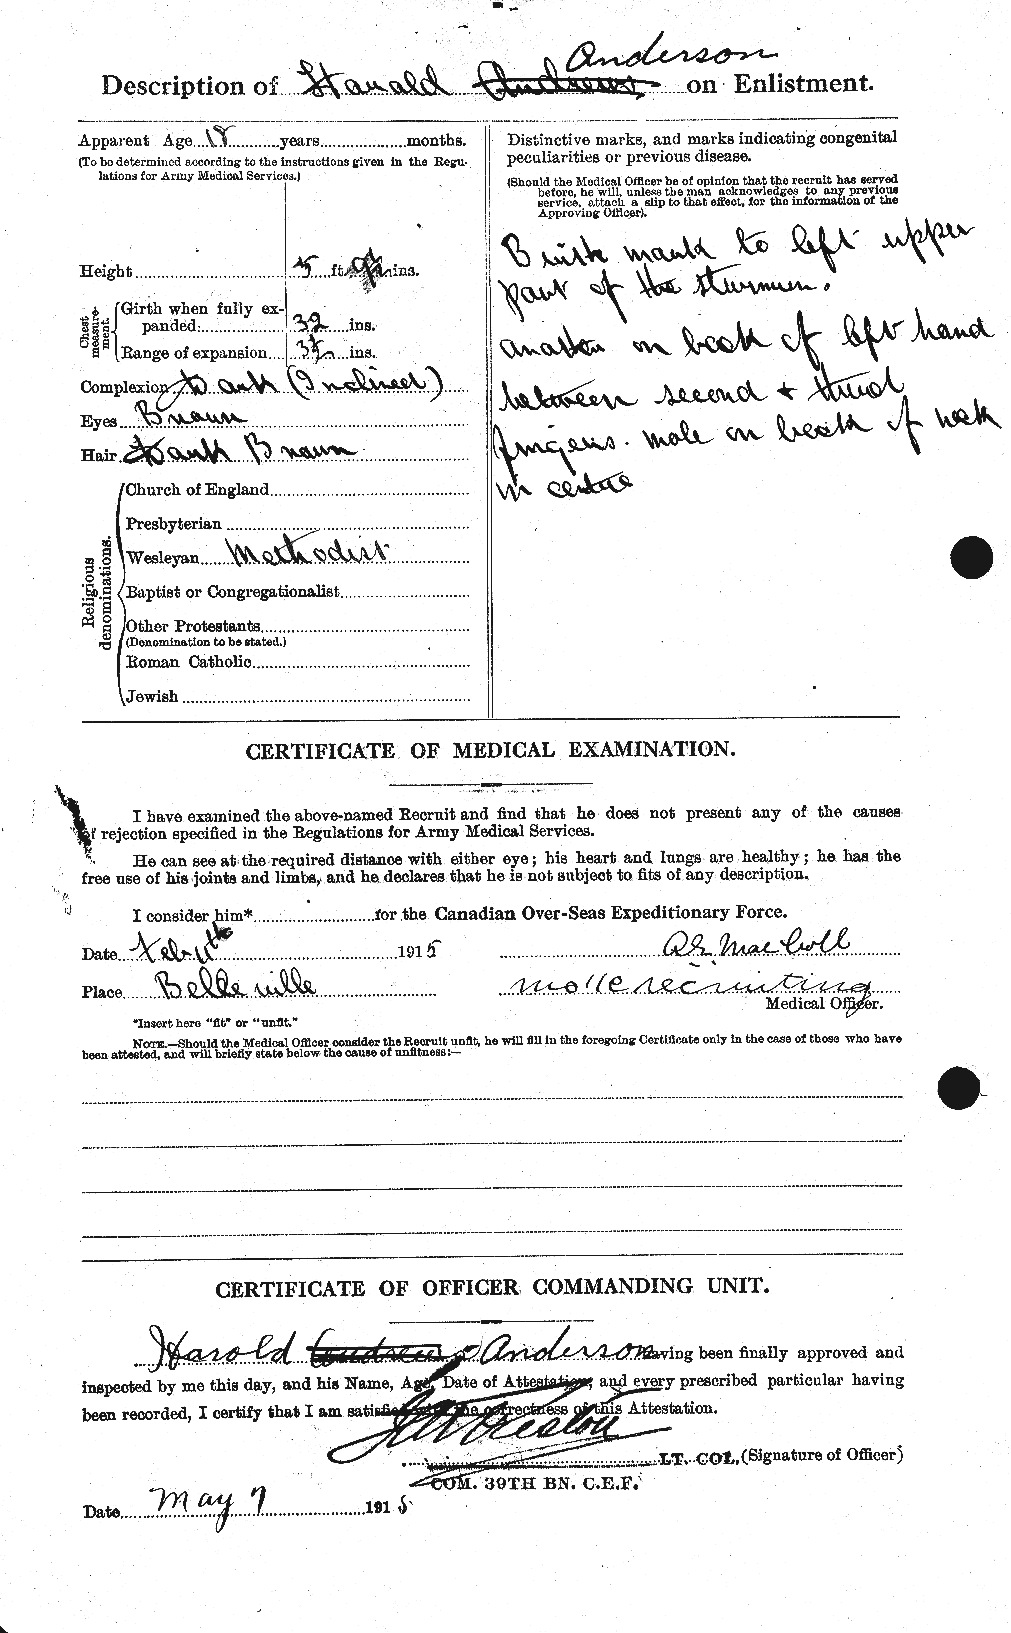 Personnel Records of the First World War - CEF 213294b